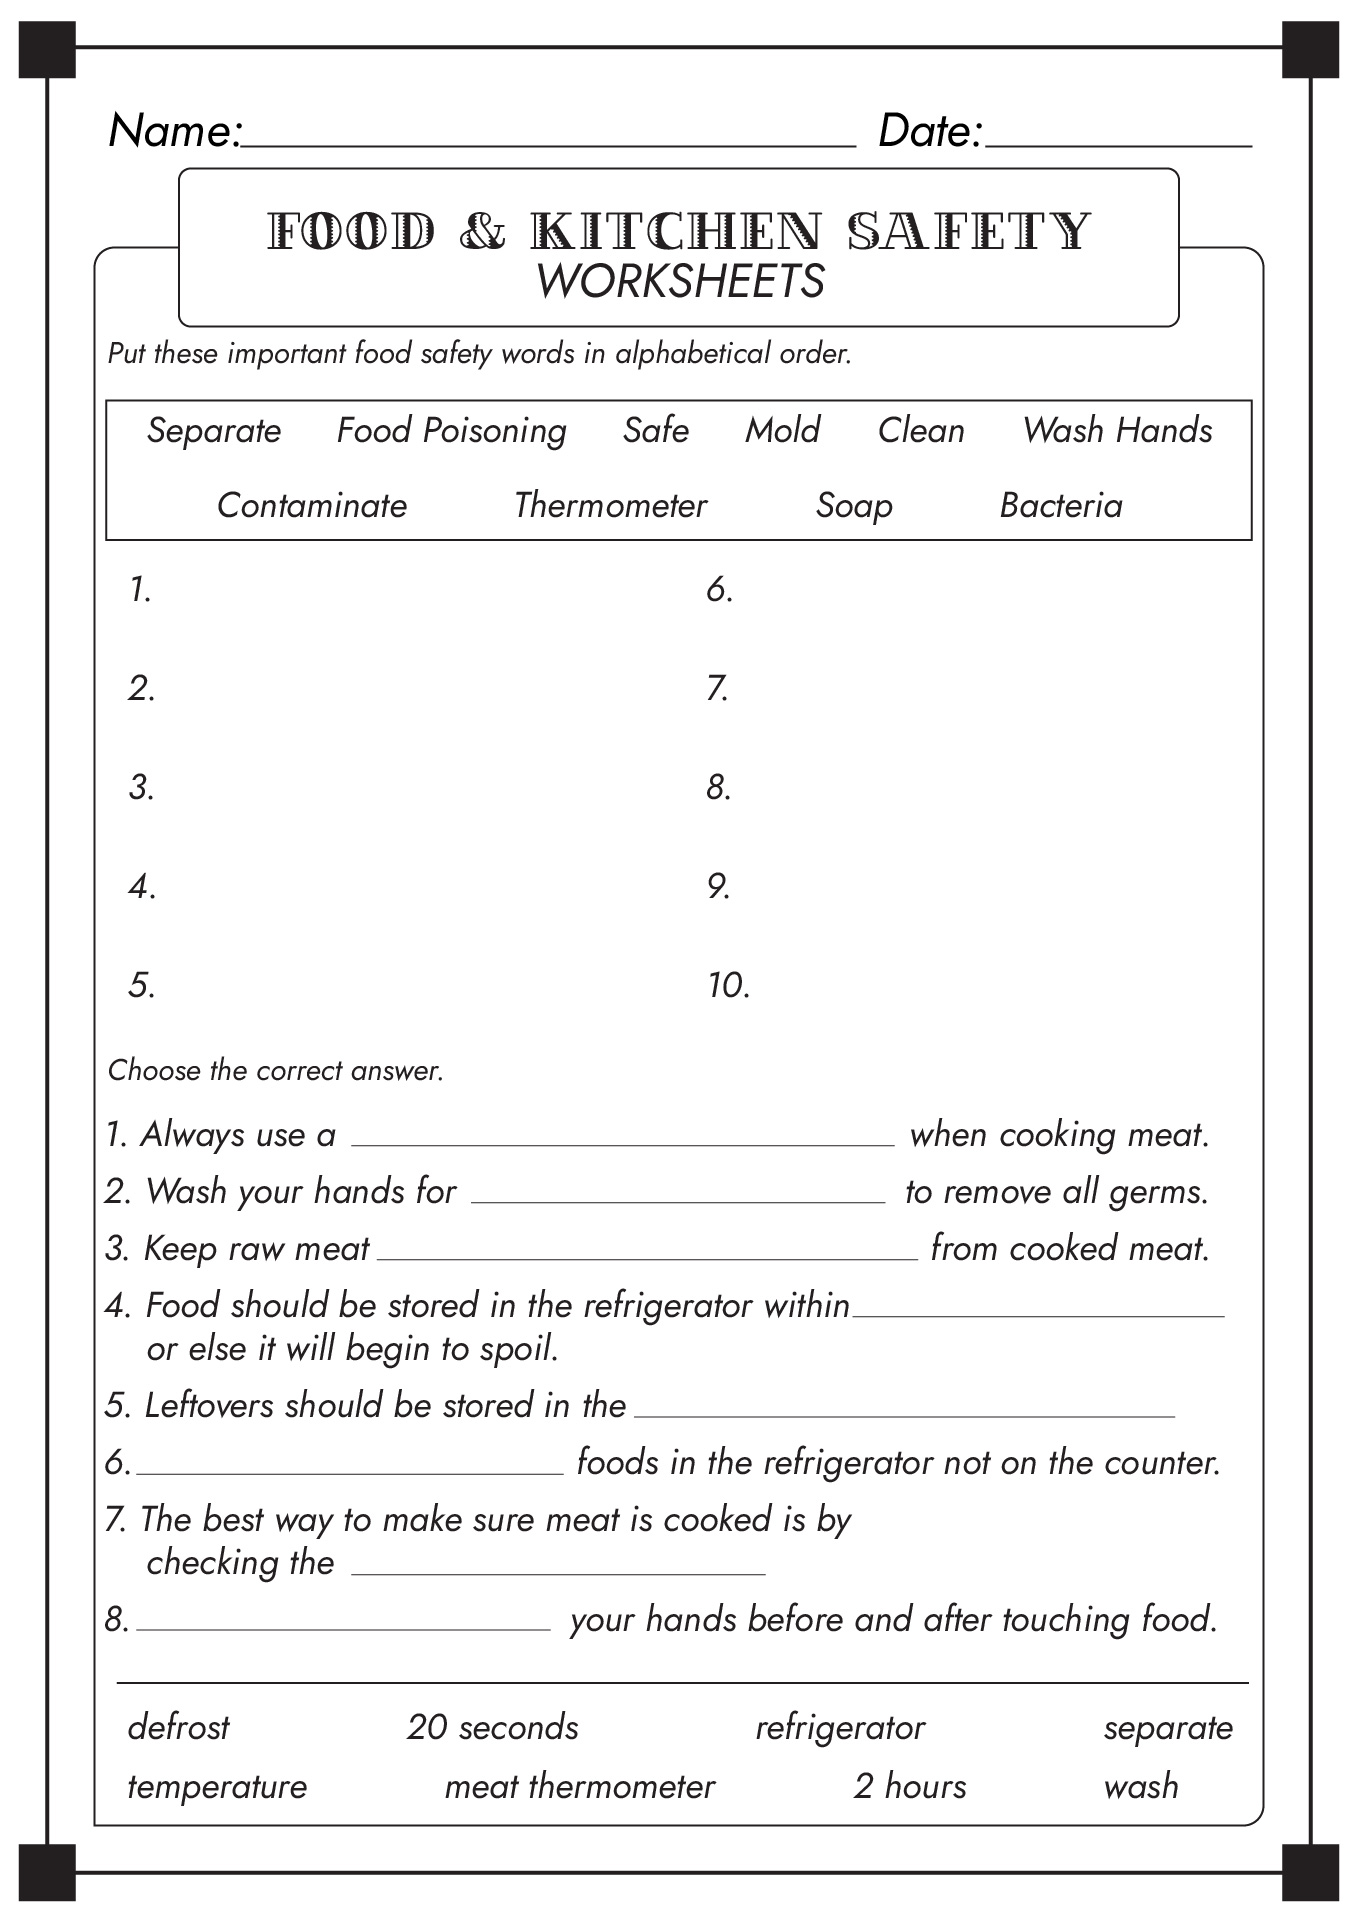 Food and Kitchen Safety Worksheet